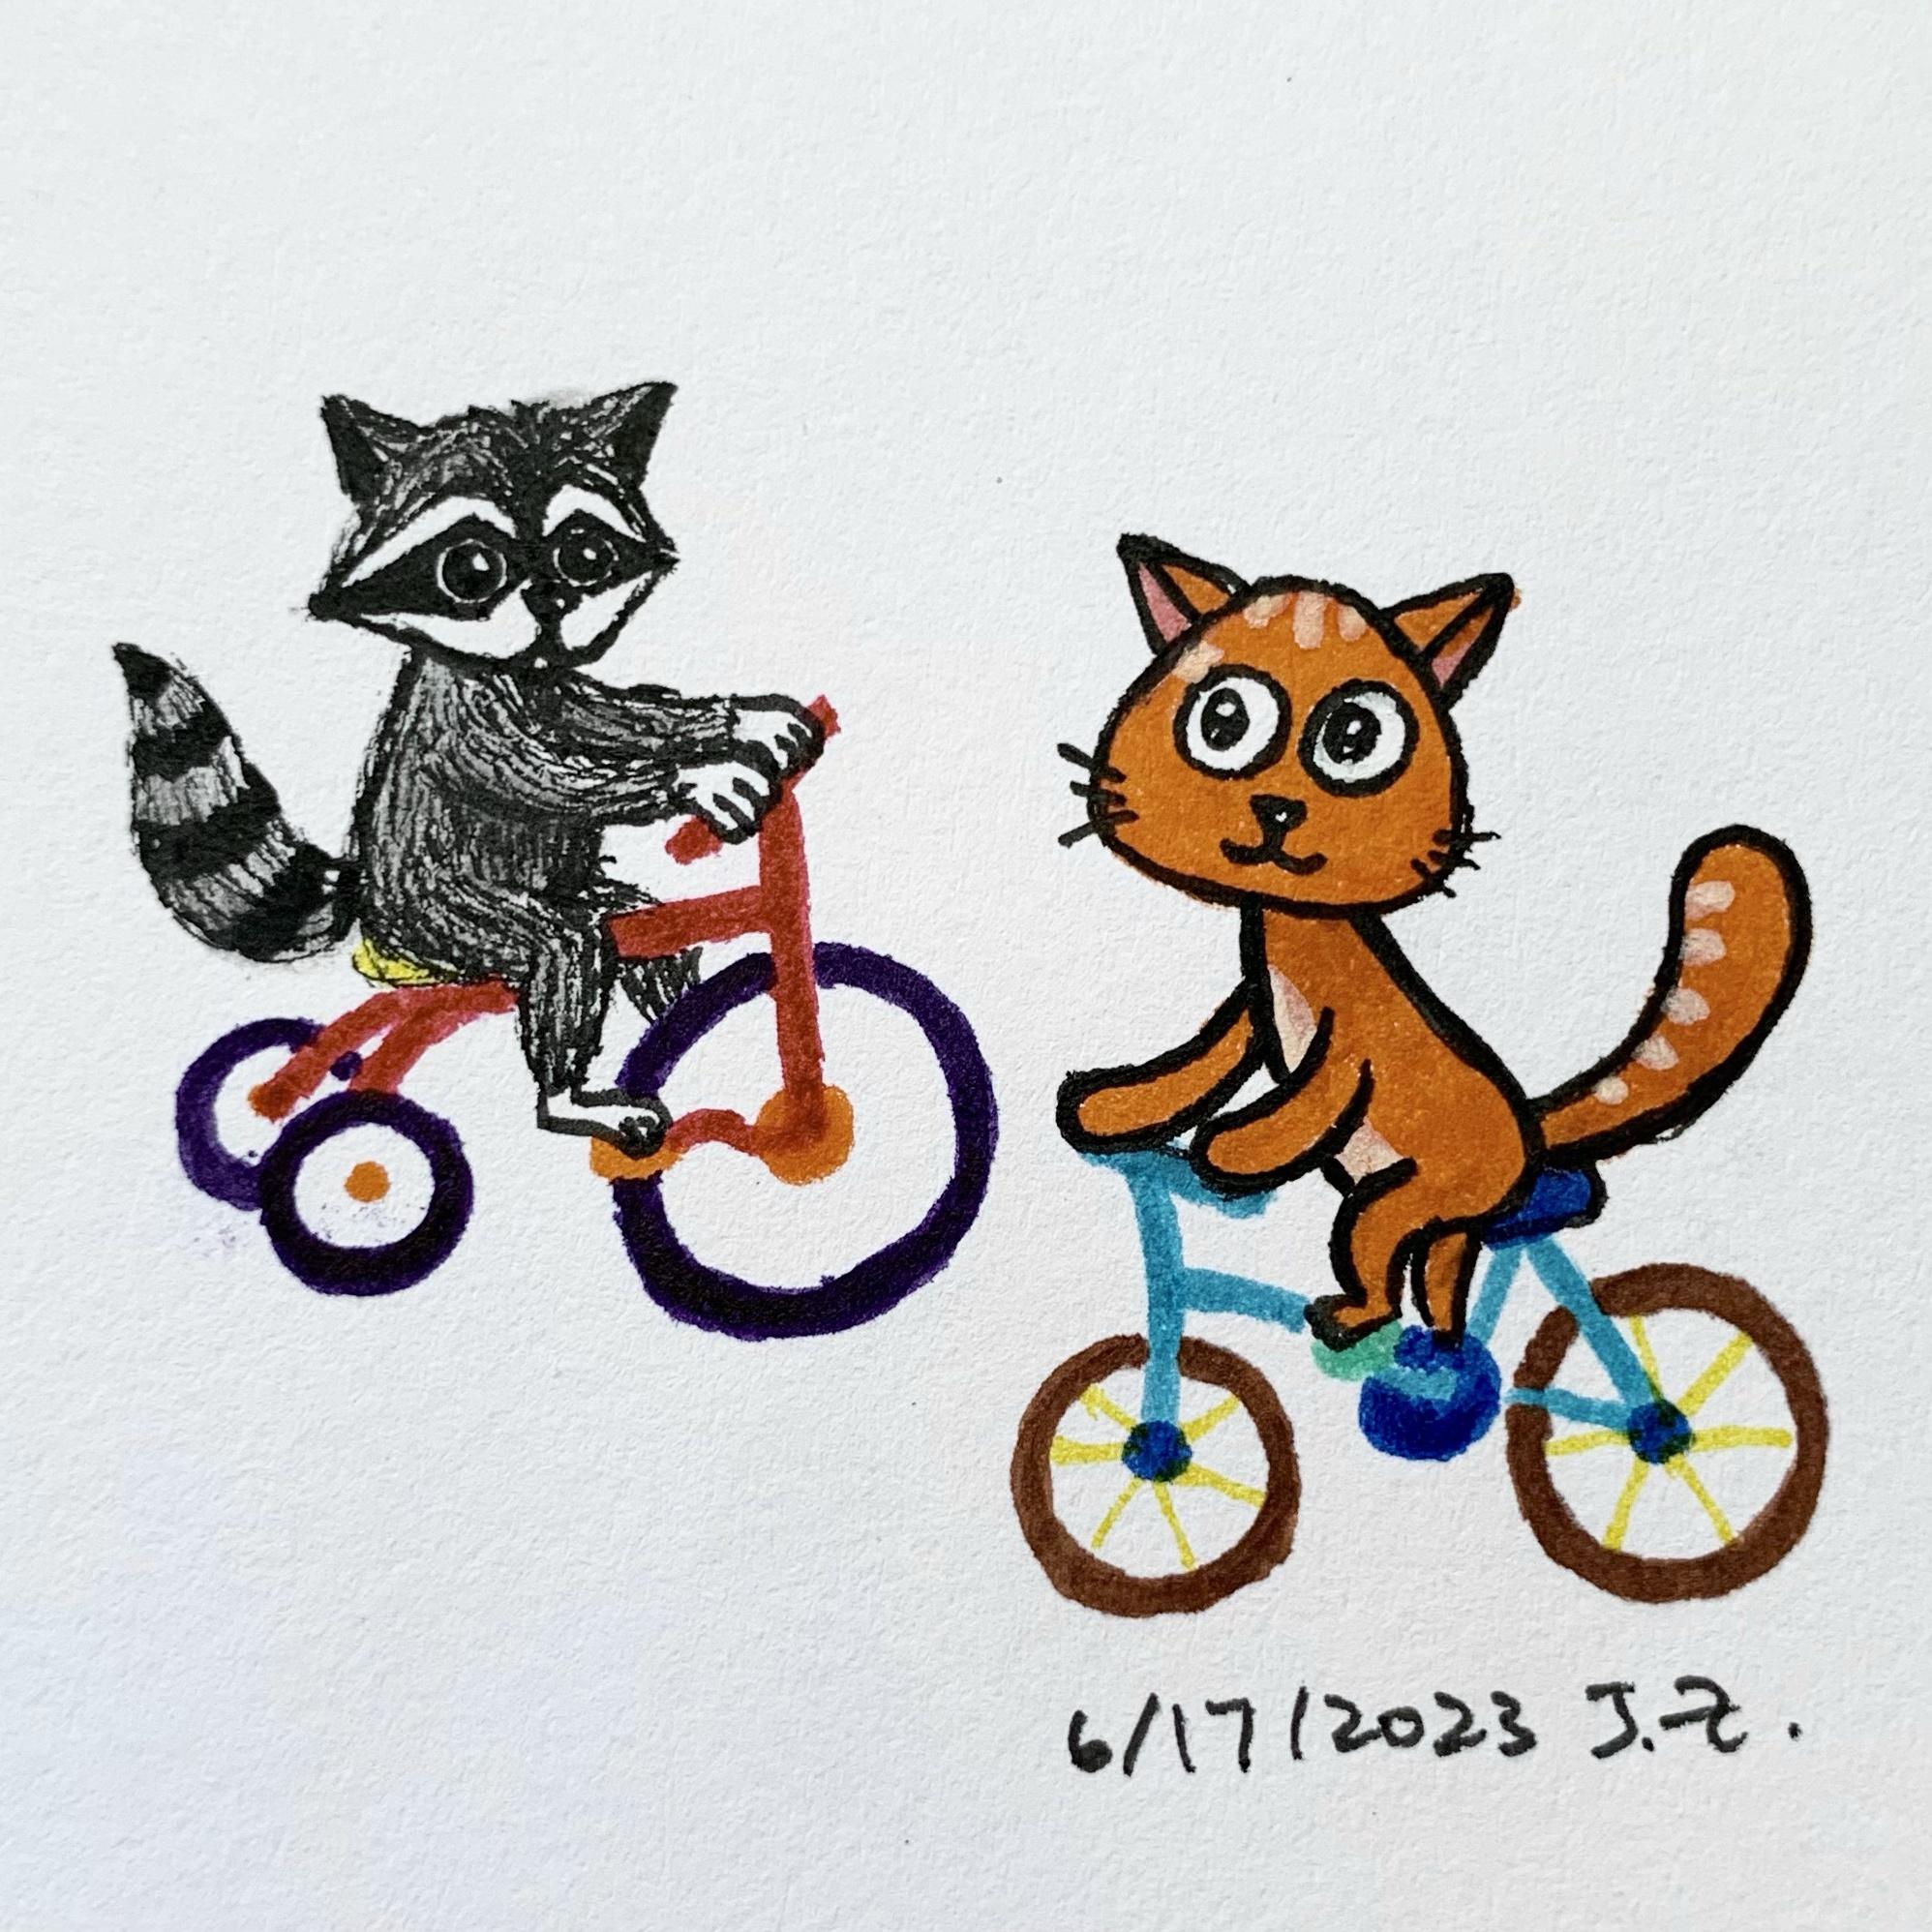 Raccoon and Cat skedaddle bikes together 6/17/2023 Sketchdaily